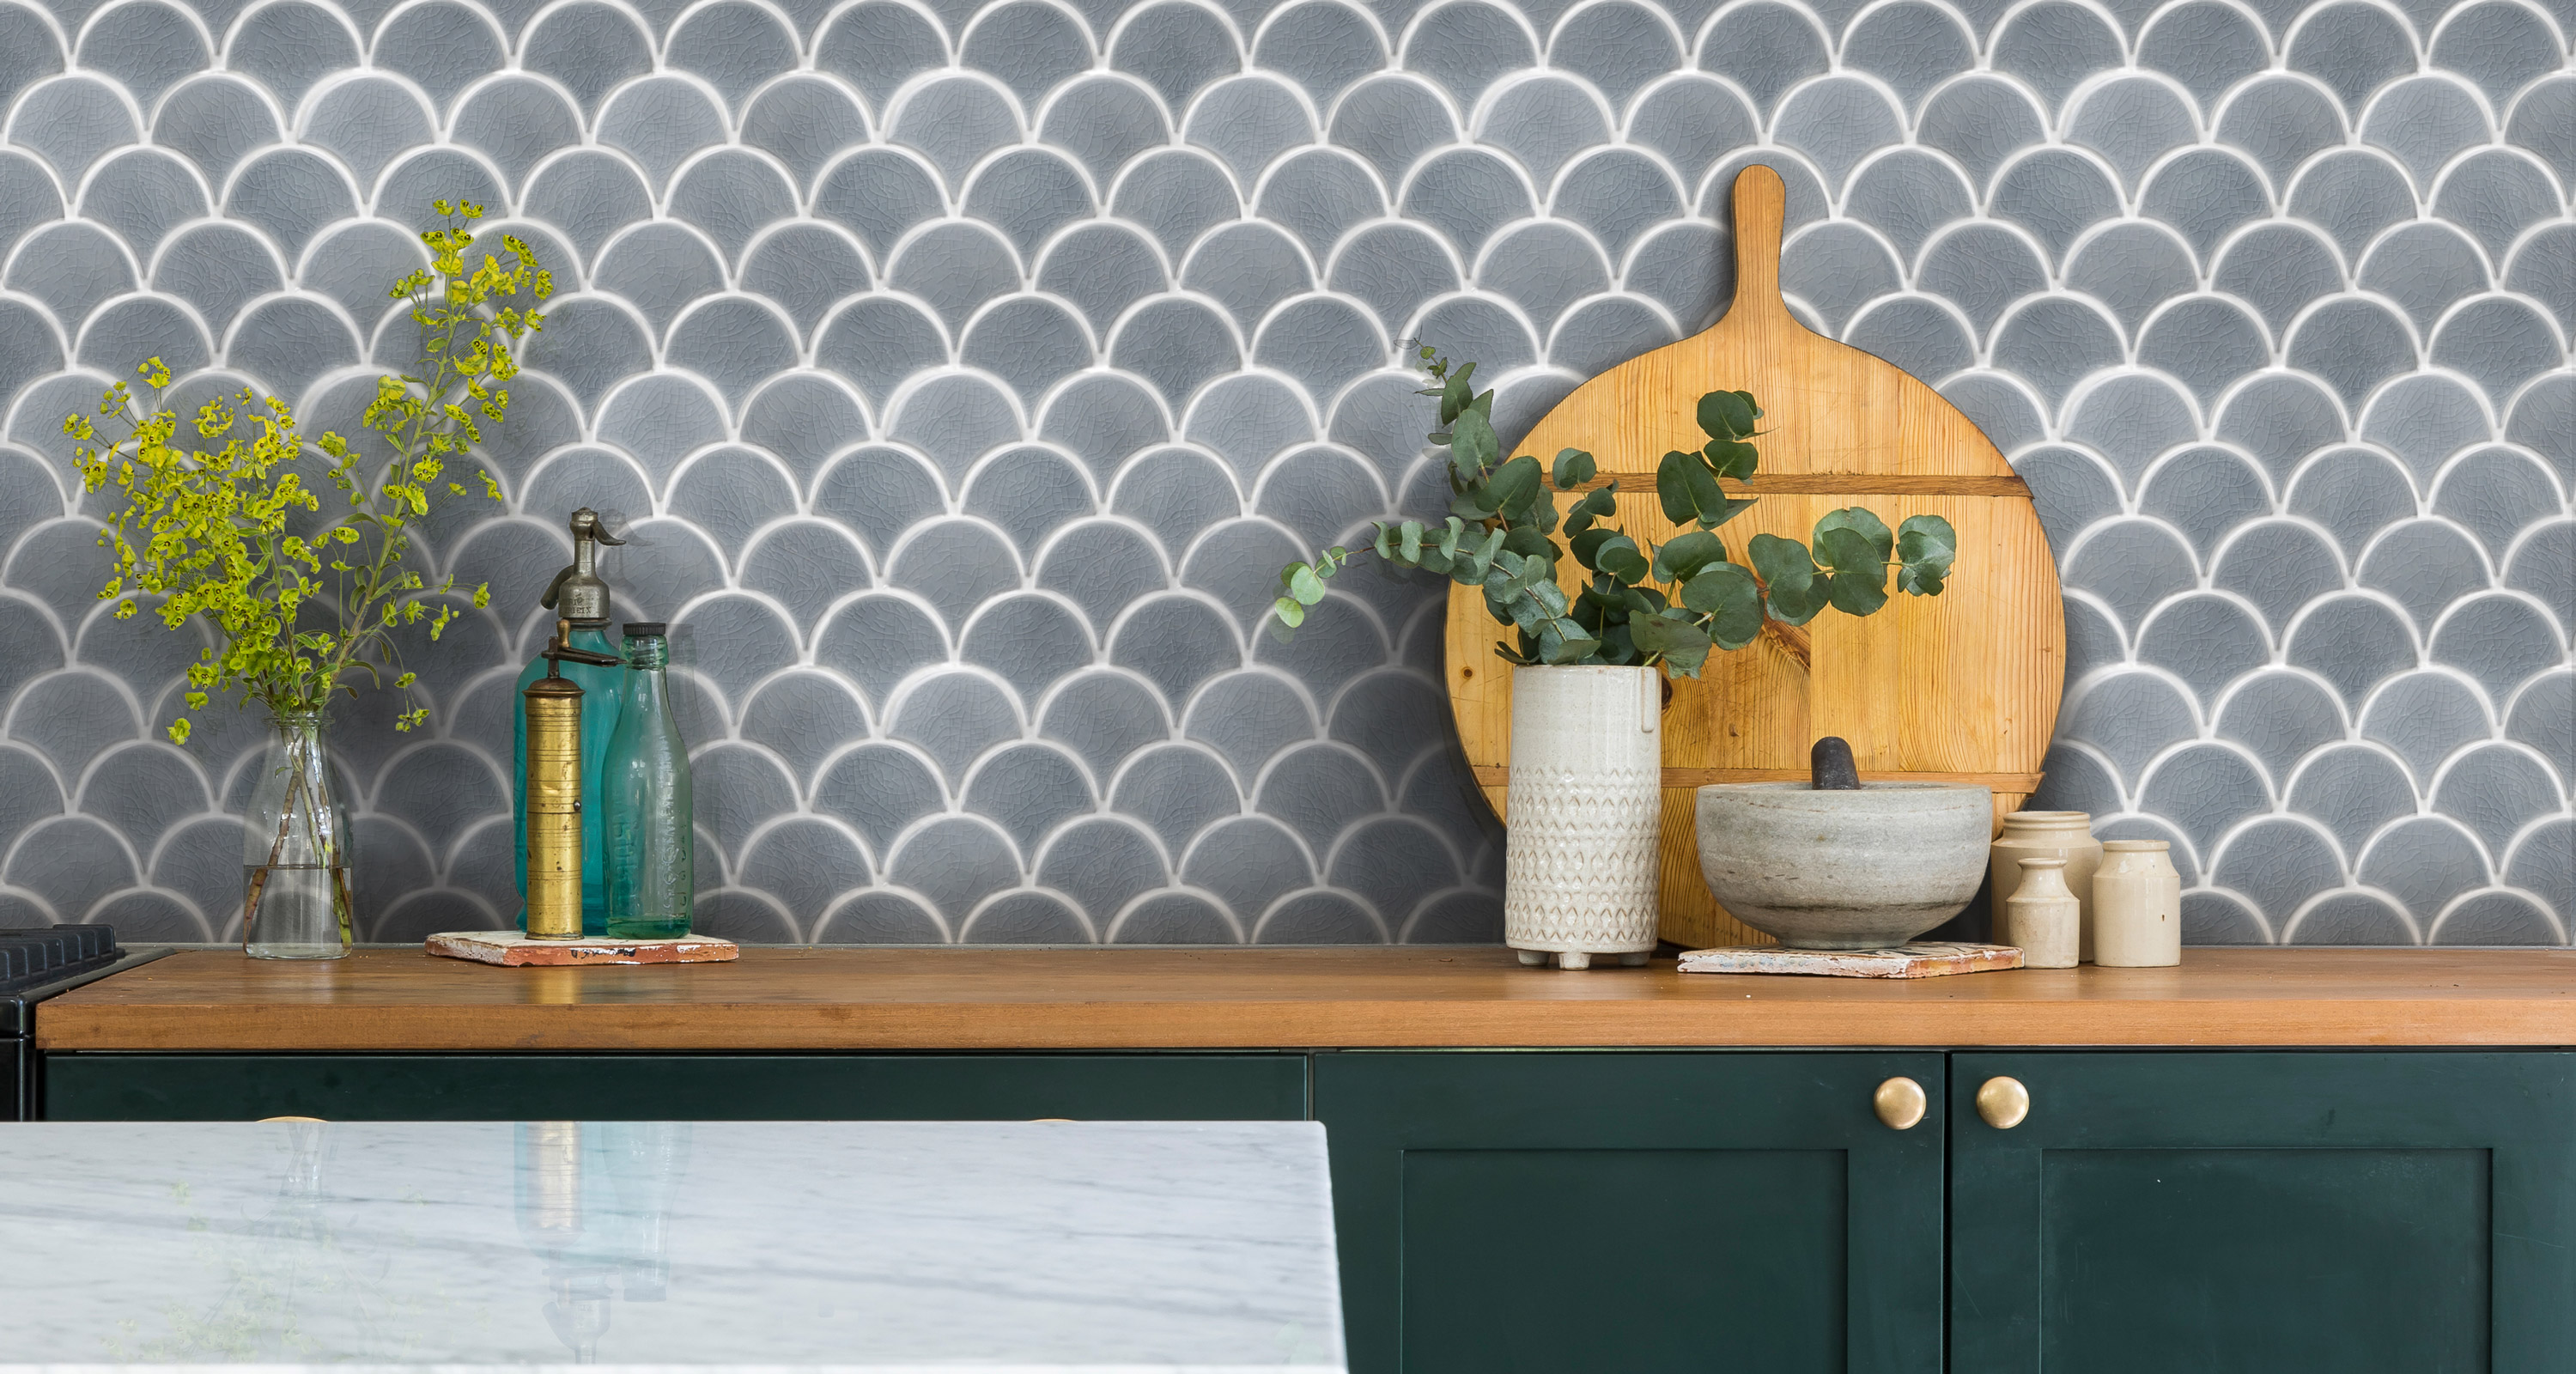 Kitchen wall tile ideas: Stylish ways with wall tiles | Homes & Gardens |